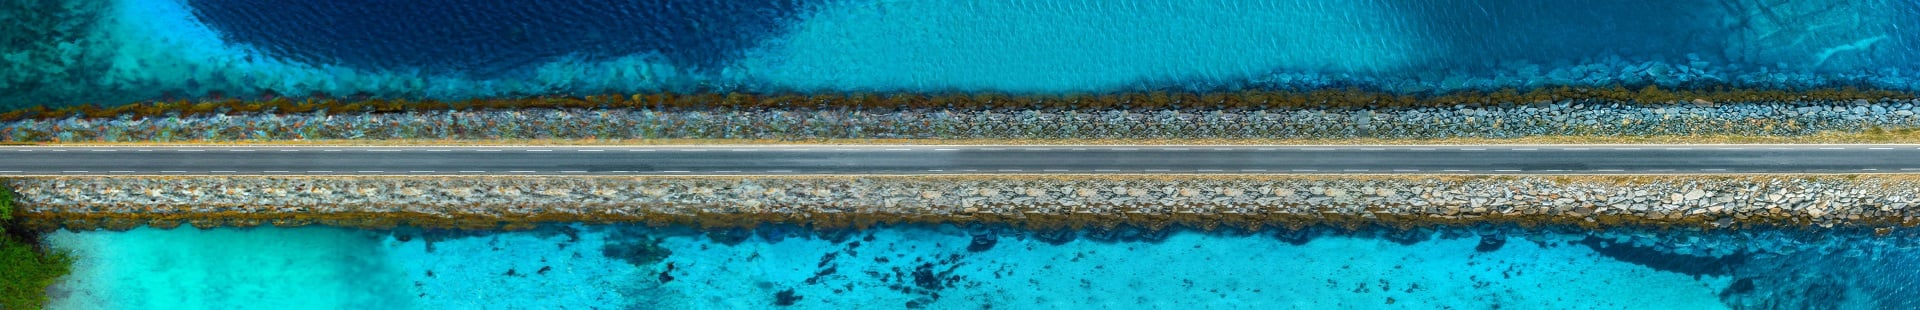 bnr-road-above-ocean-viewed-from-above-03